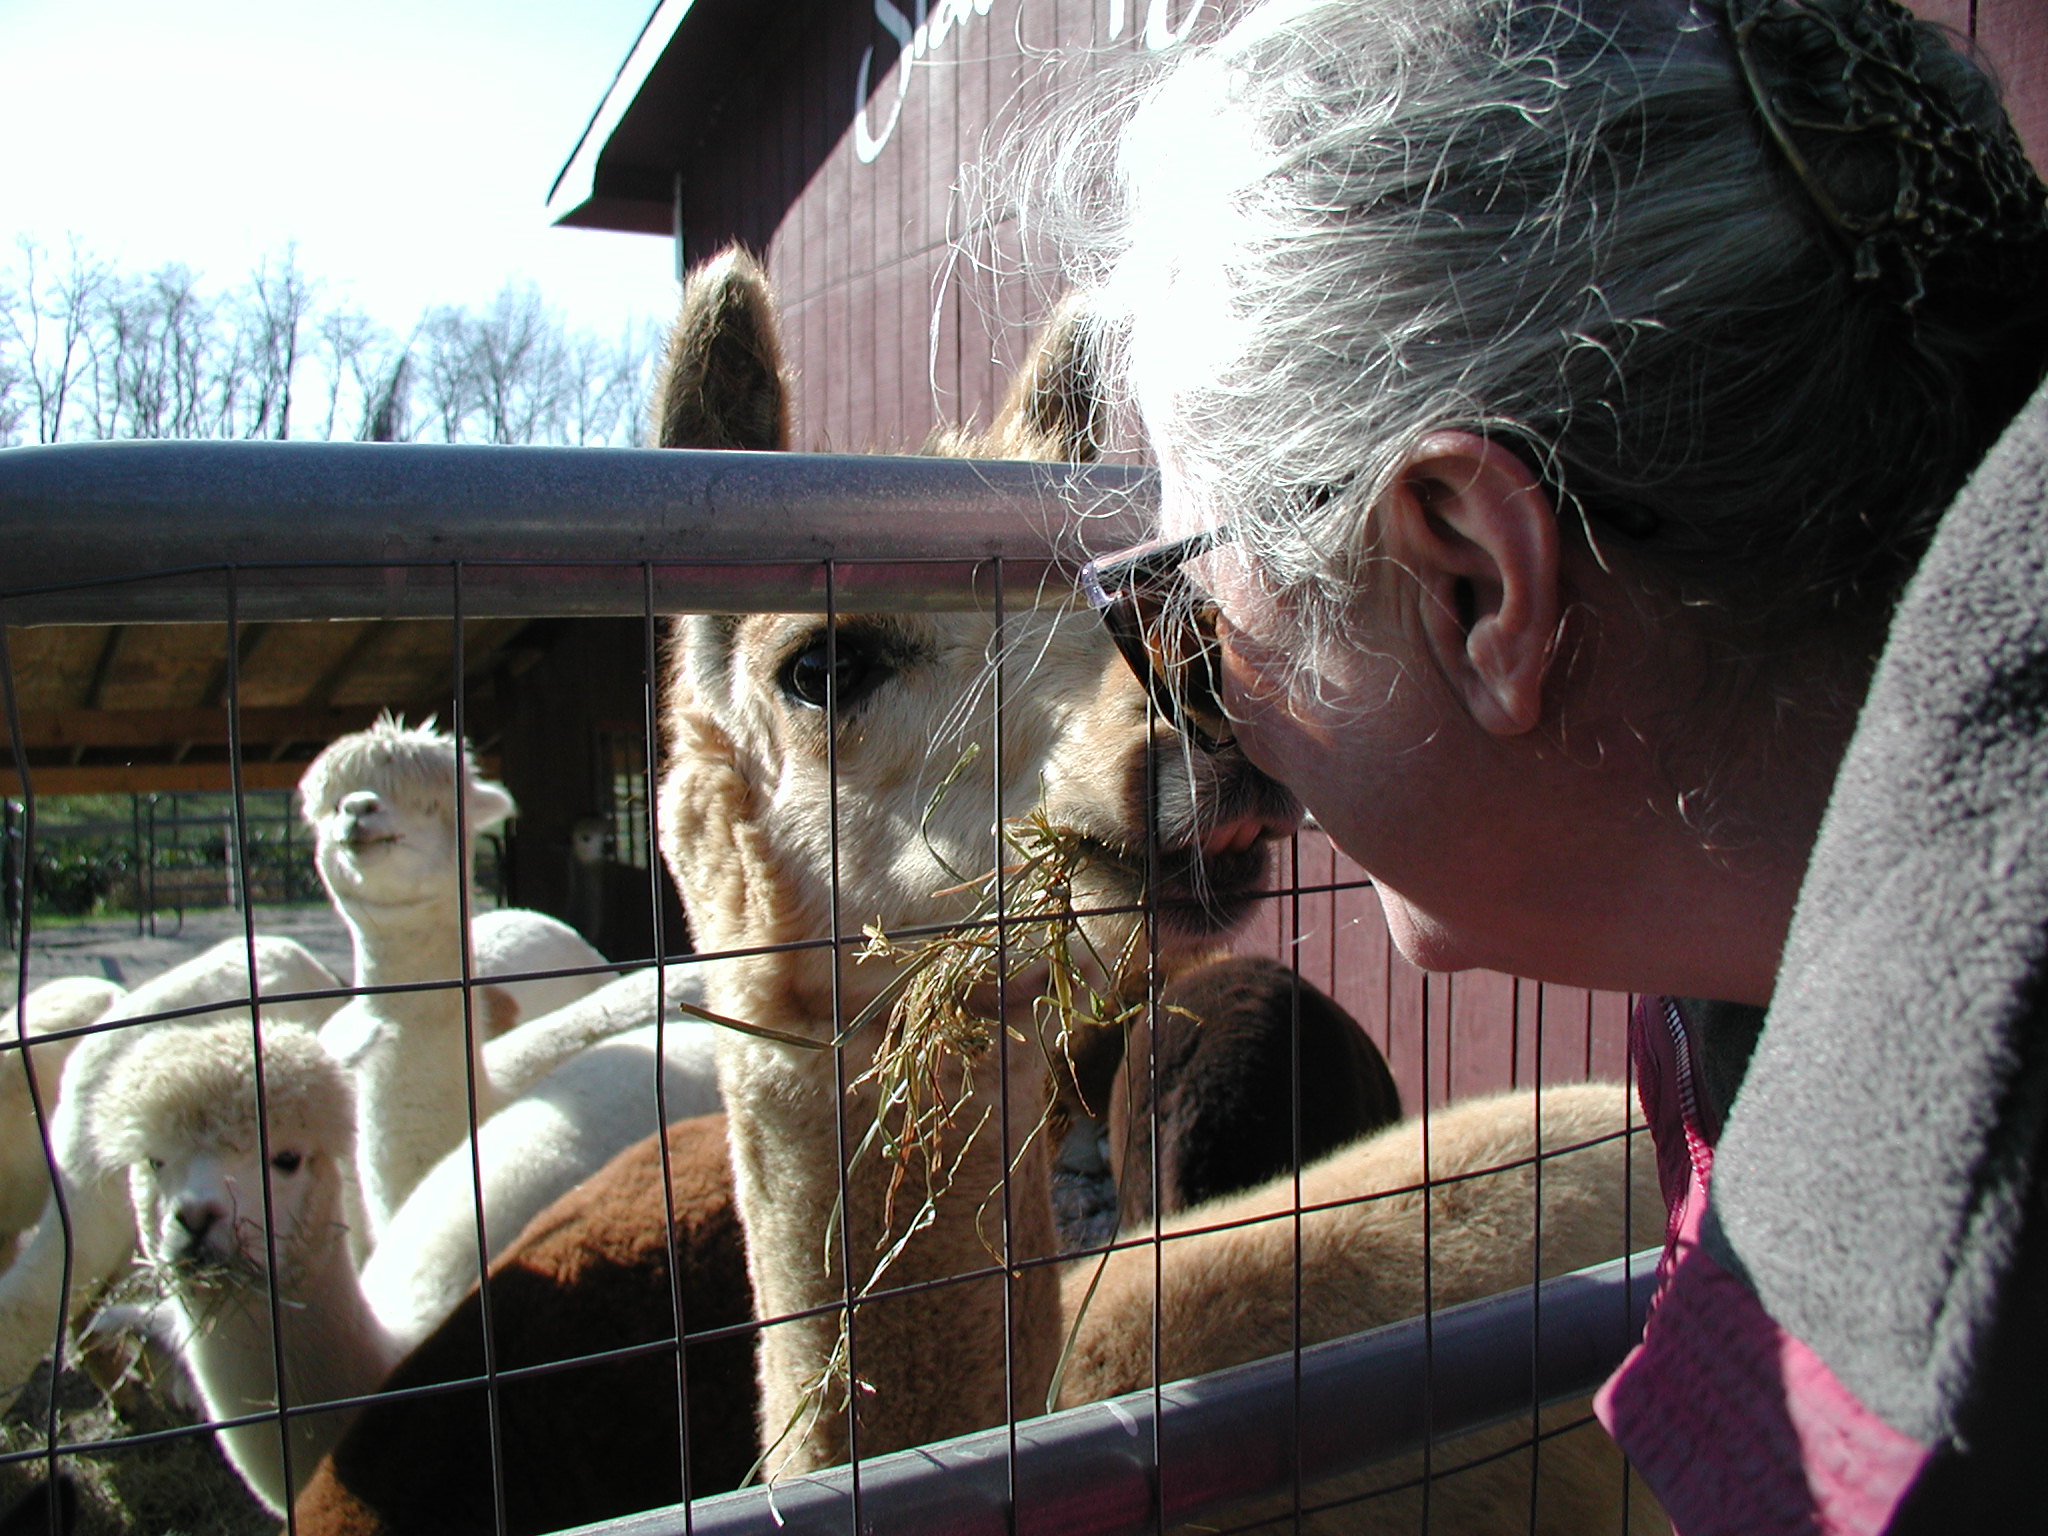 Jean makes a pact with an alpaca